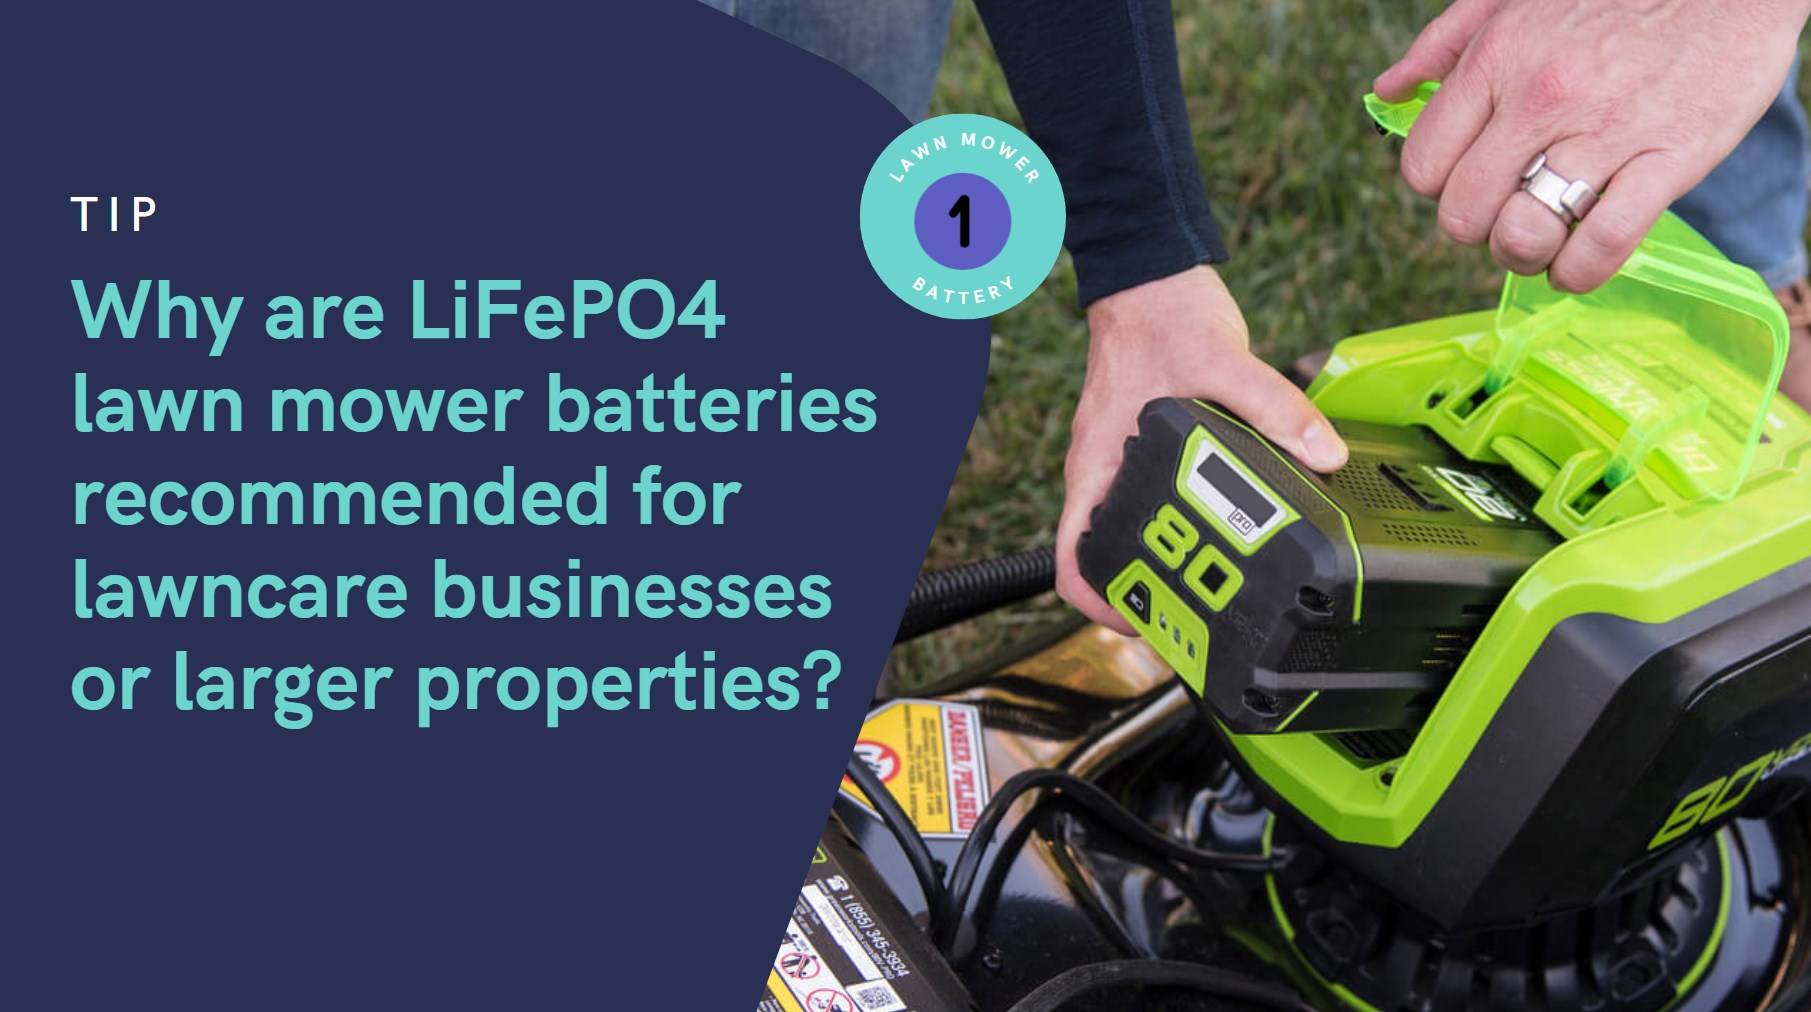 Why are lithium LiFePO4 lawn mower batteries recommended for lawncare businesses or larger properties?